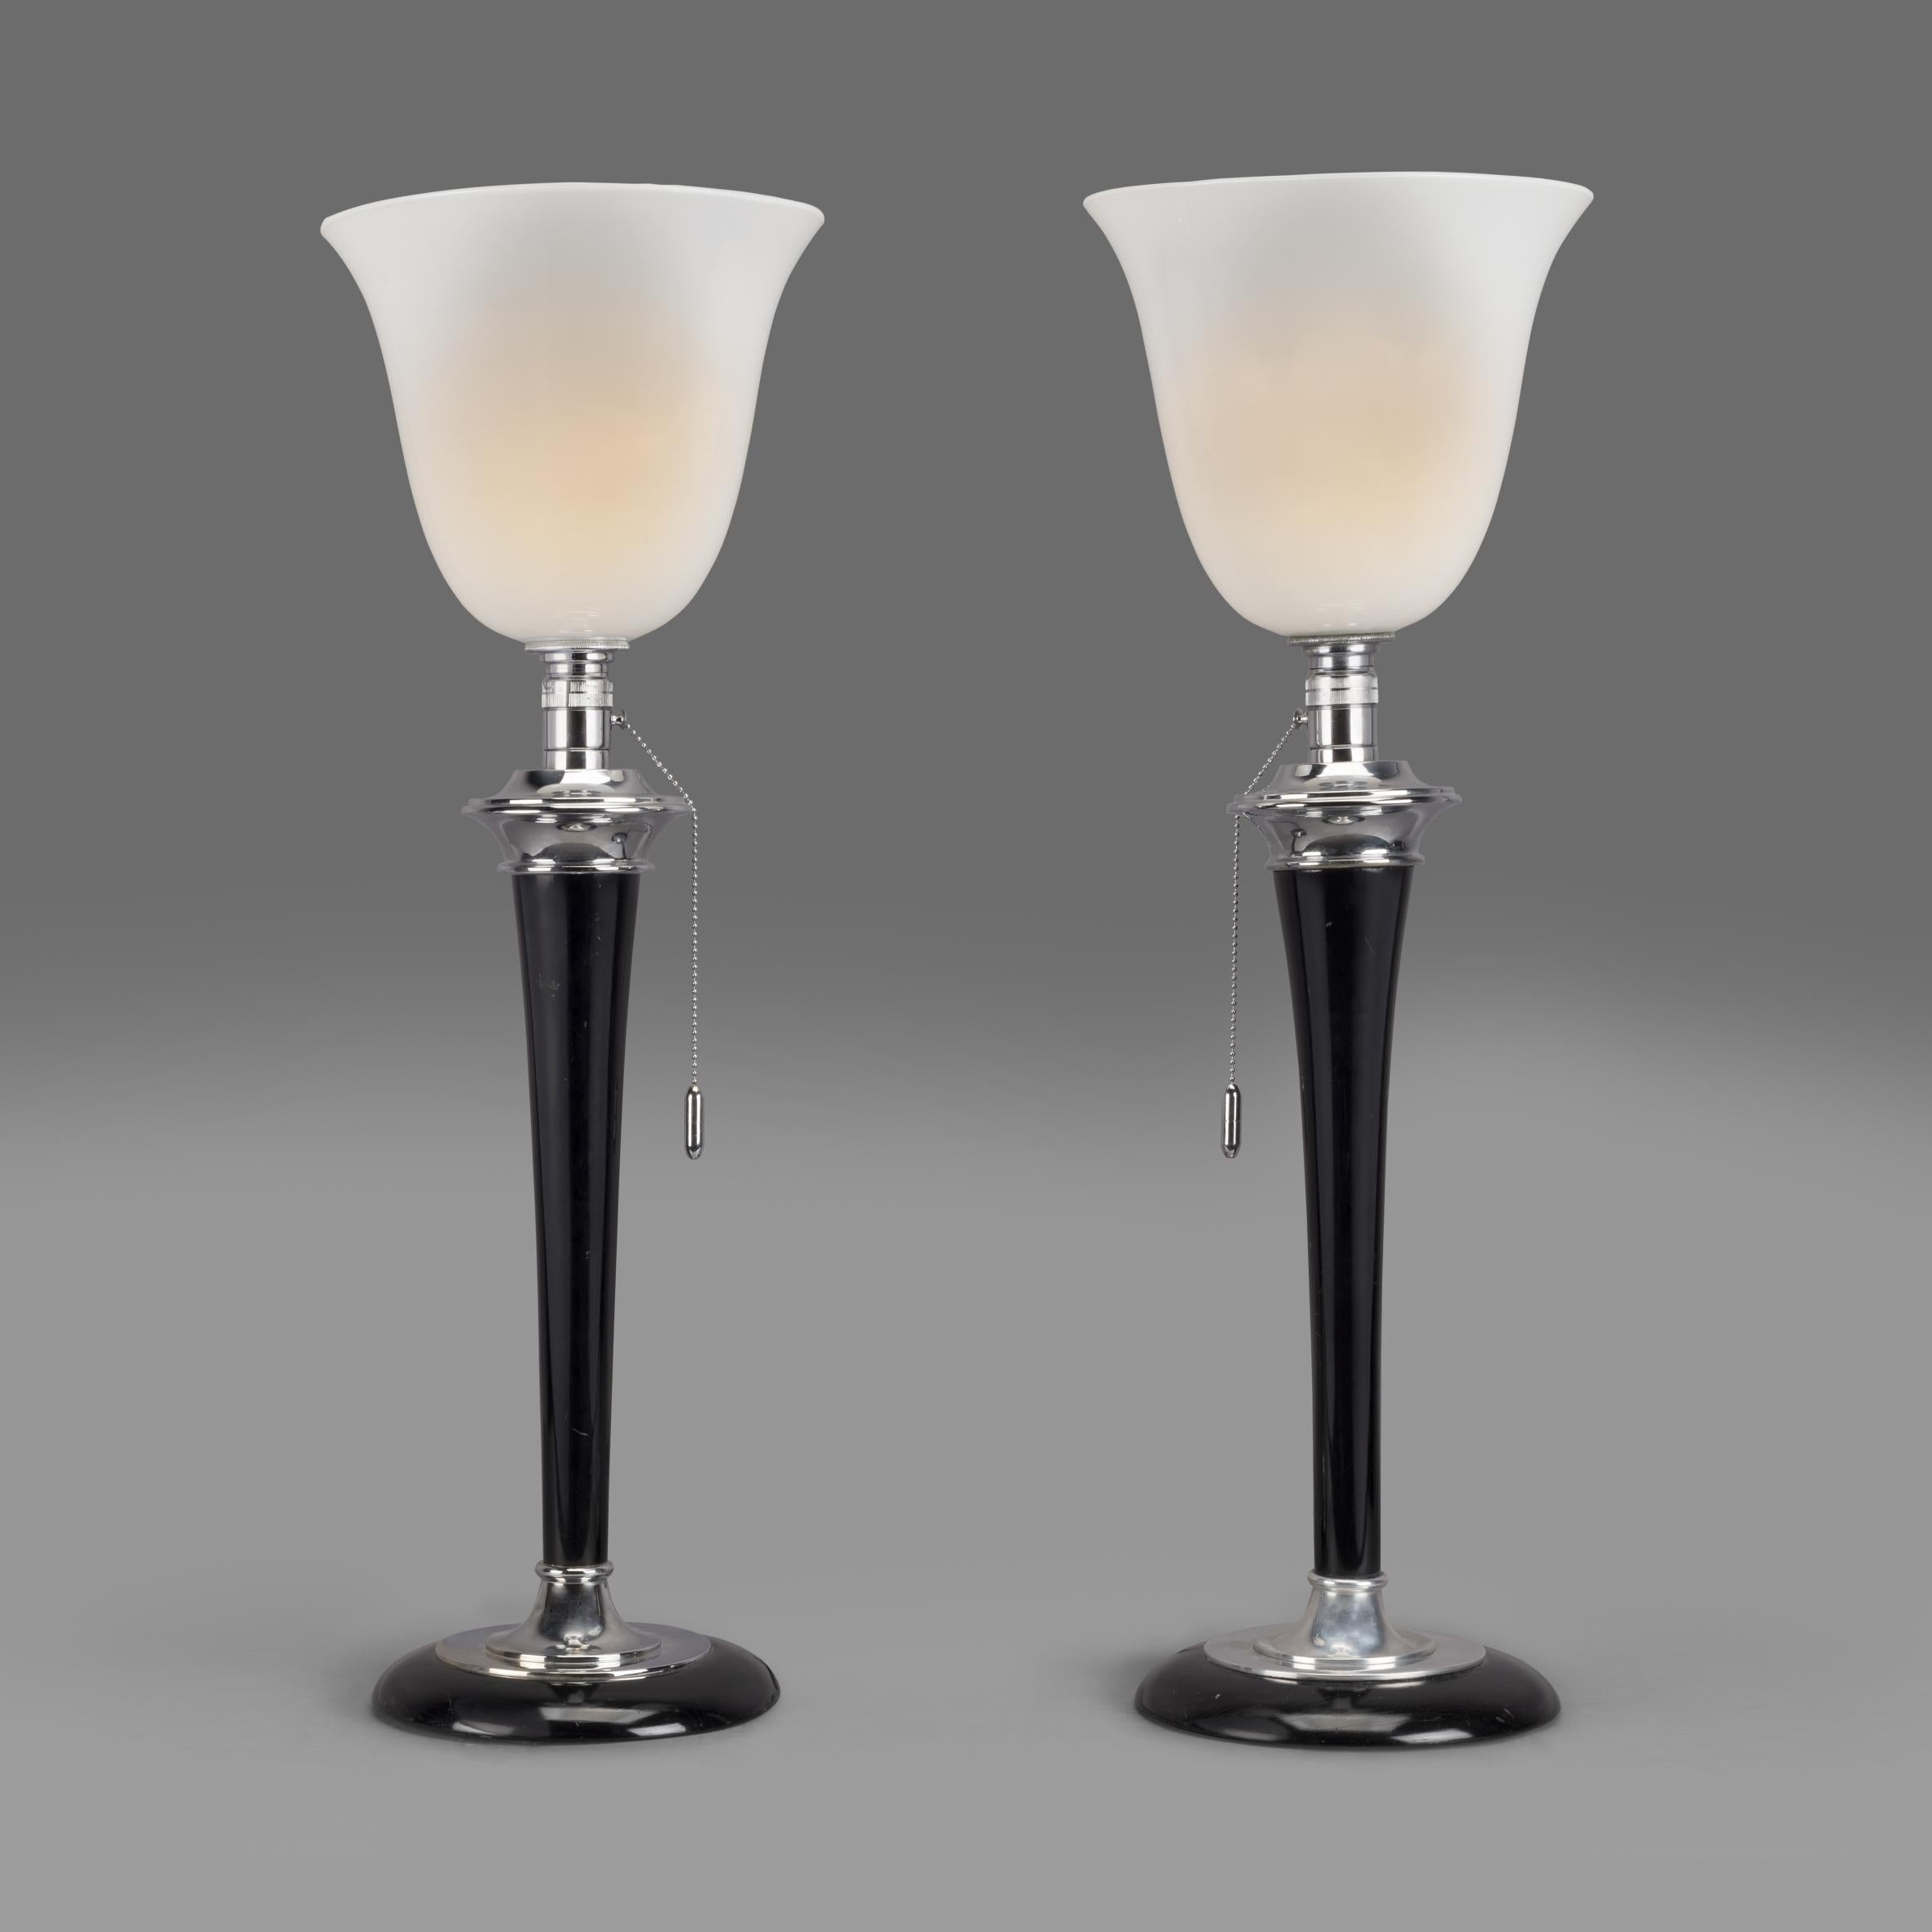 An original pair of Art Deco 'Mazda' table lamps by Compagnie des Lampes de Paris.

Bearing a label to the base of one lamp for 'MAZDA'

These iconic Art Deco table lamps with their elegant profile, opaline shades, chrome fitments and ebonised